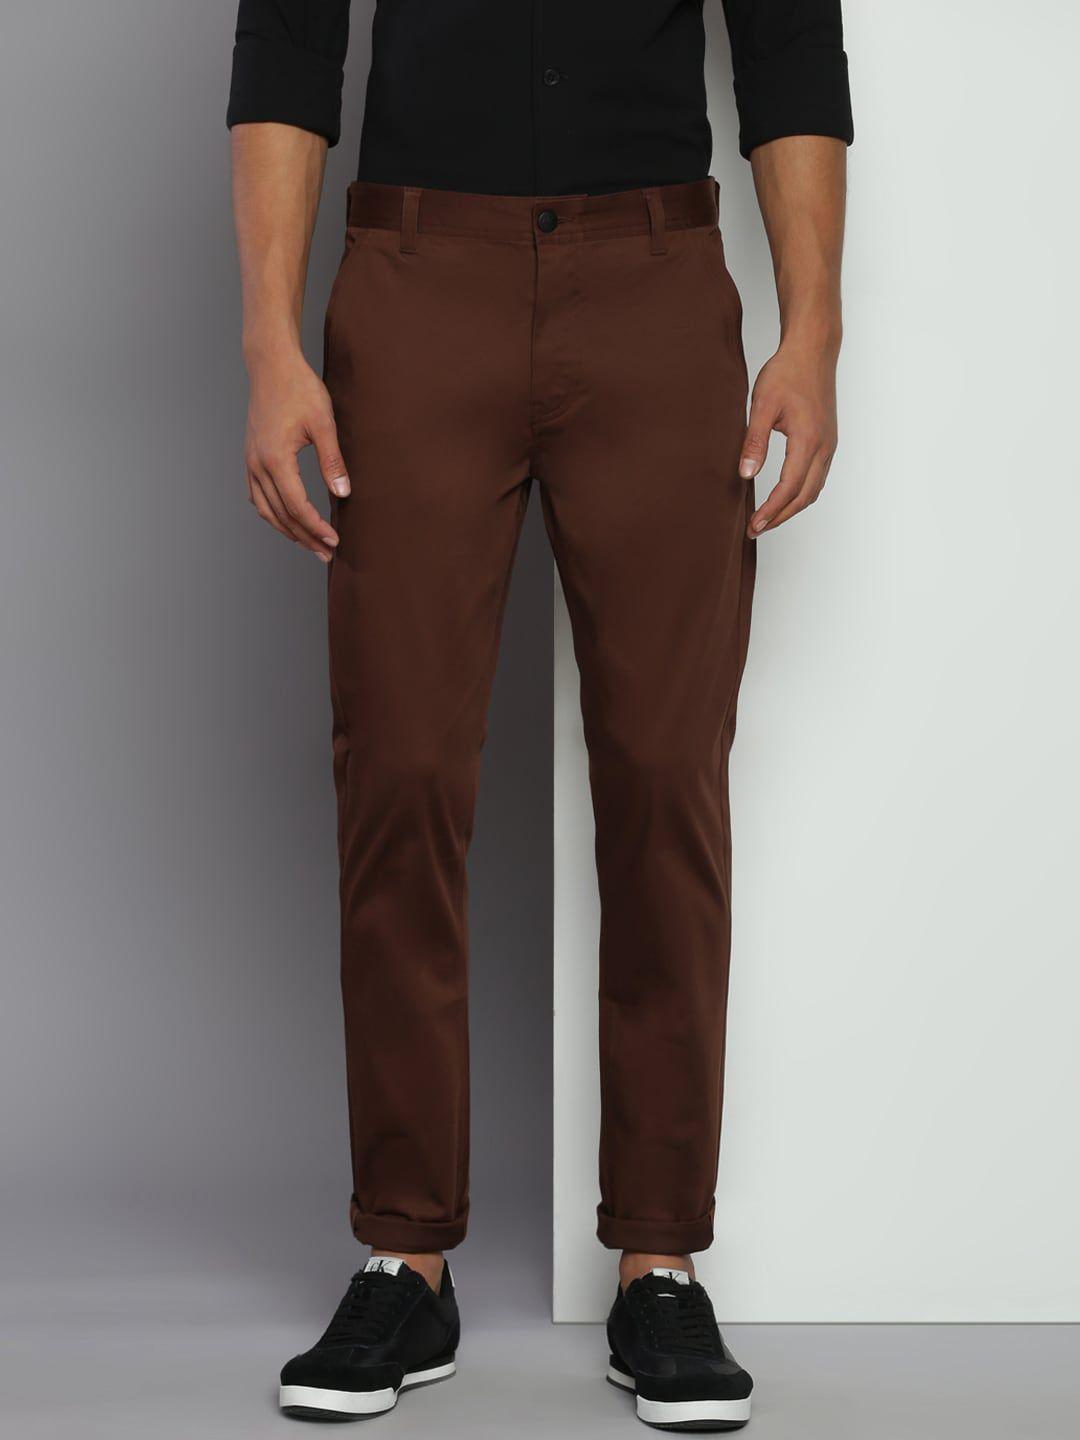 calvin klein jeans men slim fit chinos trousers